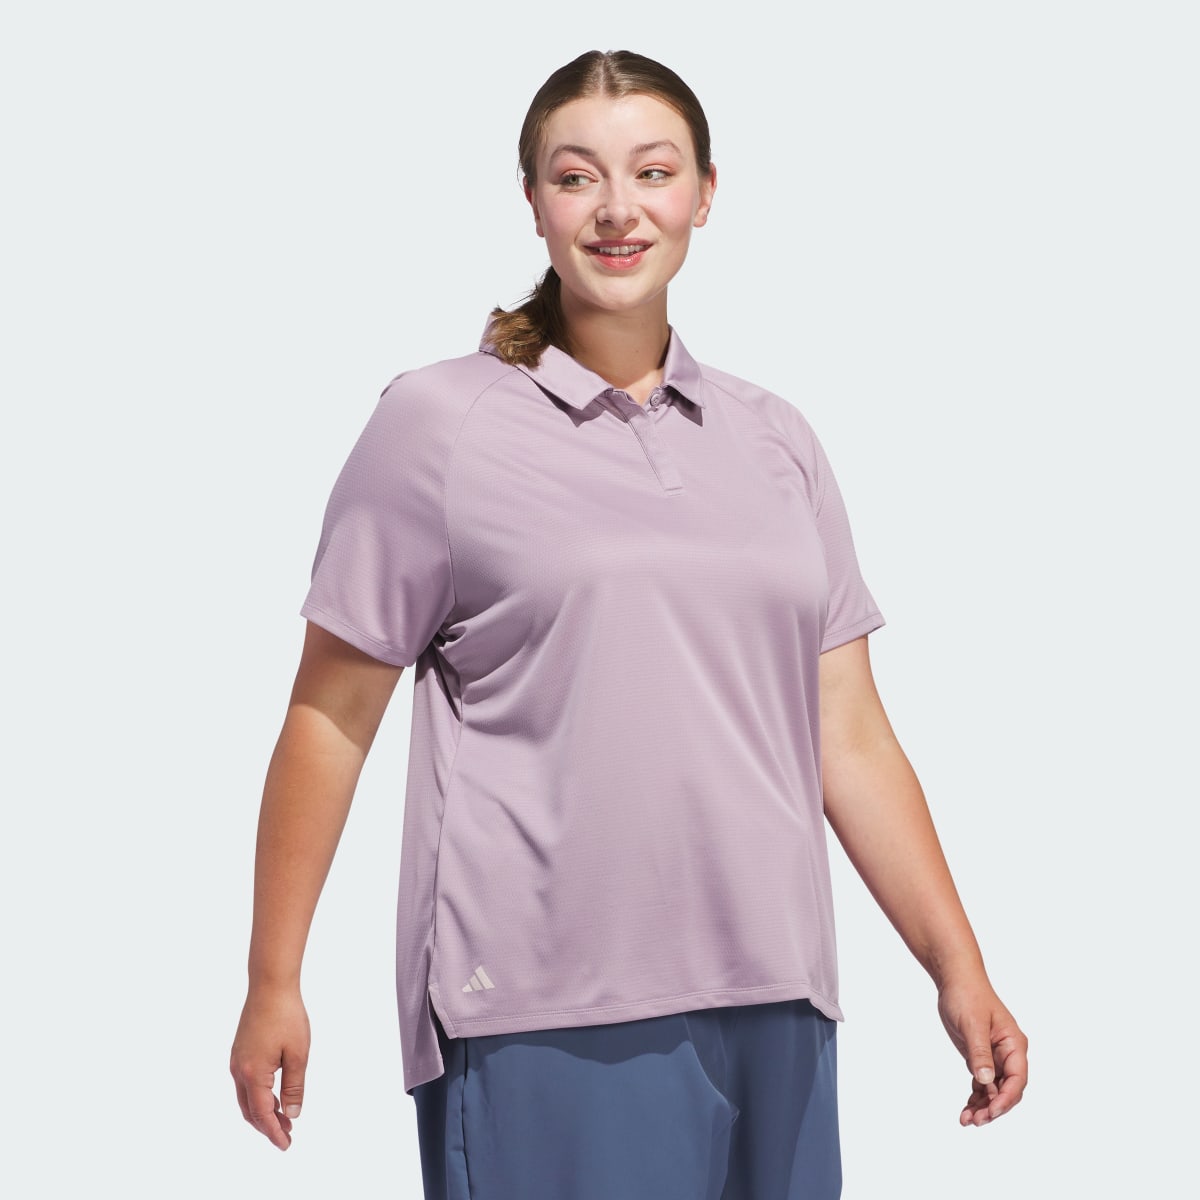 Adidas Polo HEAT.RDY Ultimate365 – Mulher (Plus Size). 4